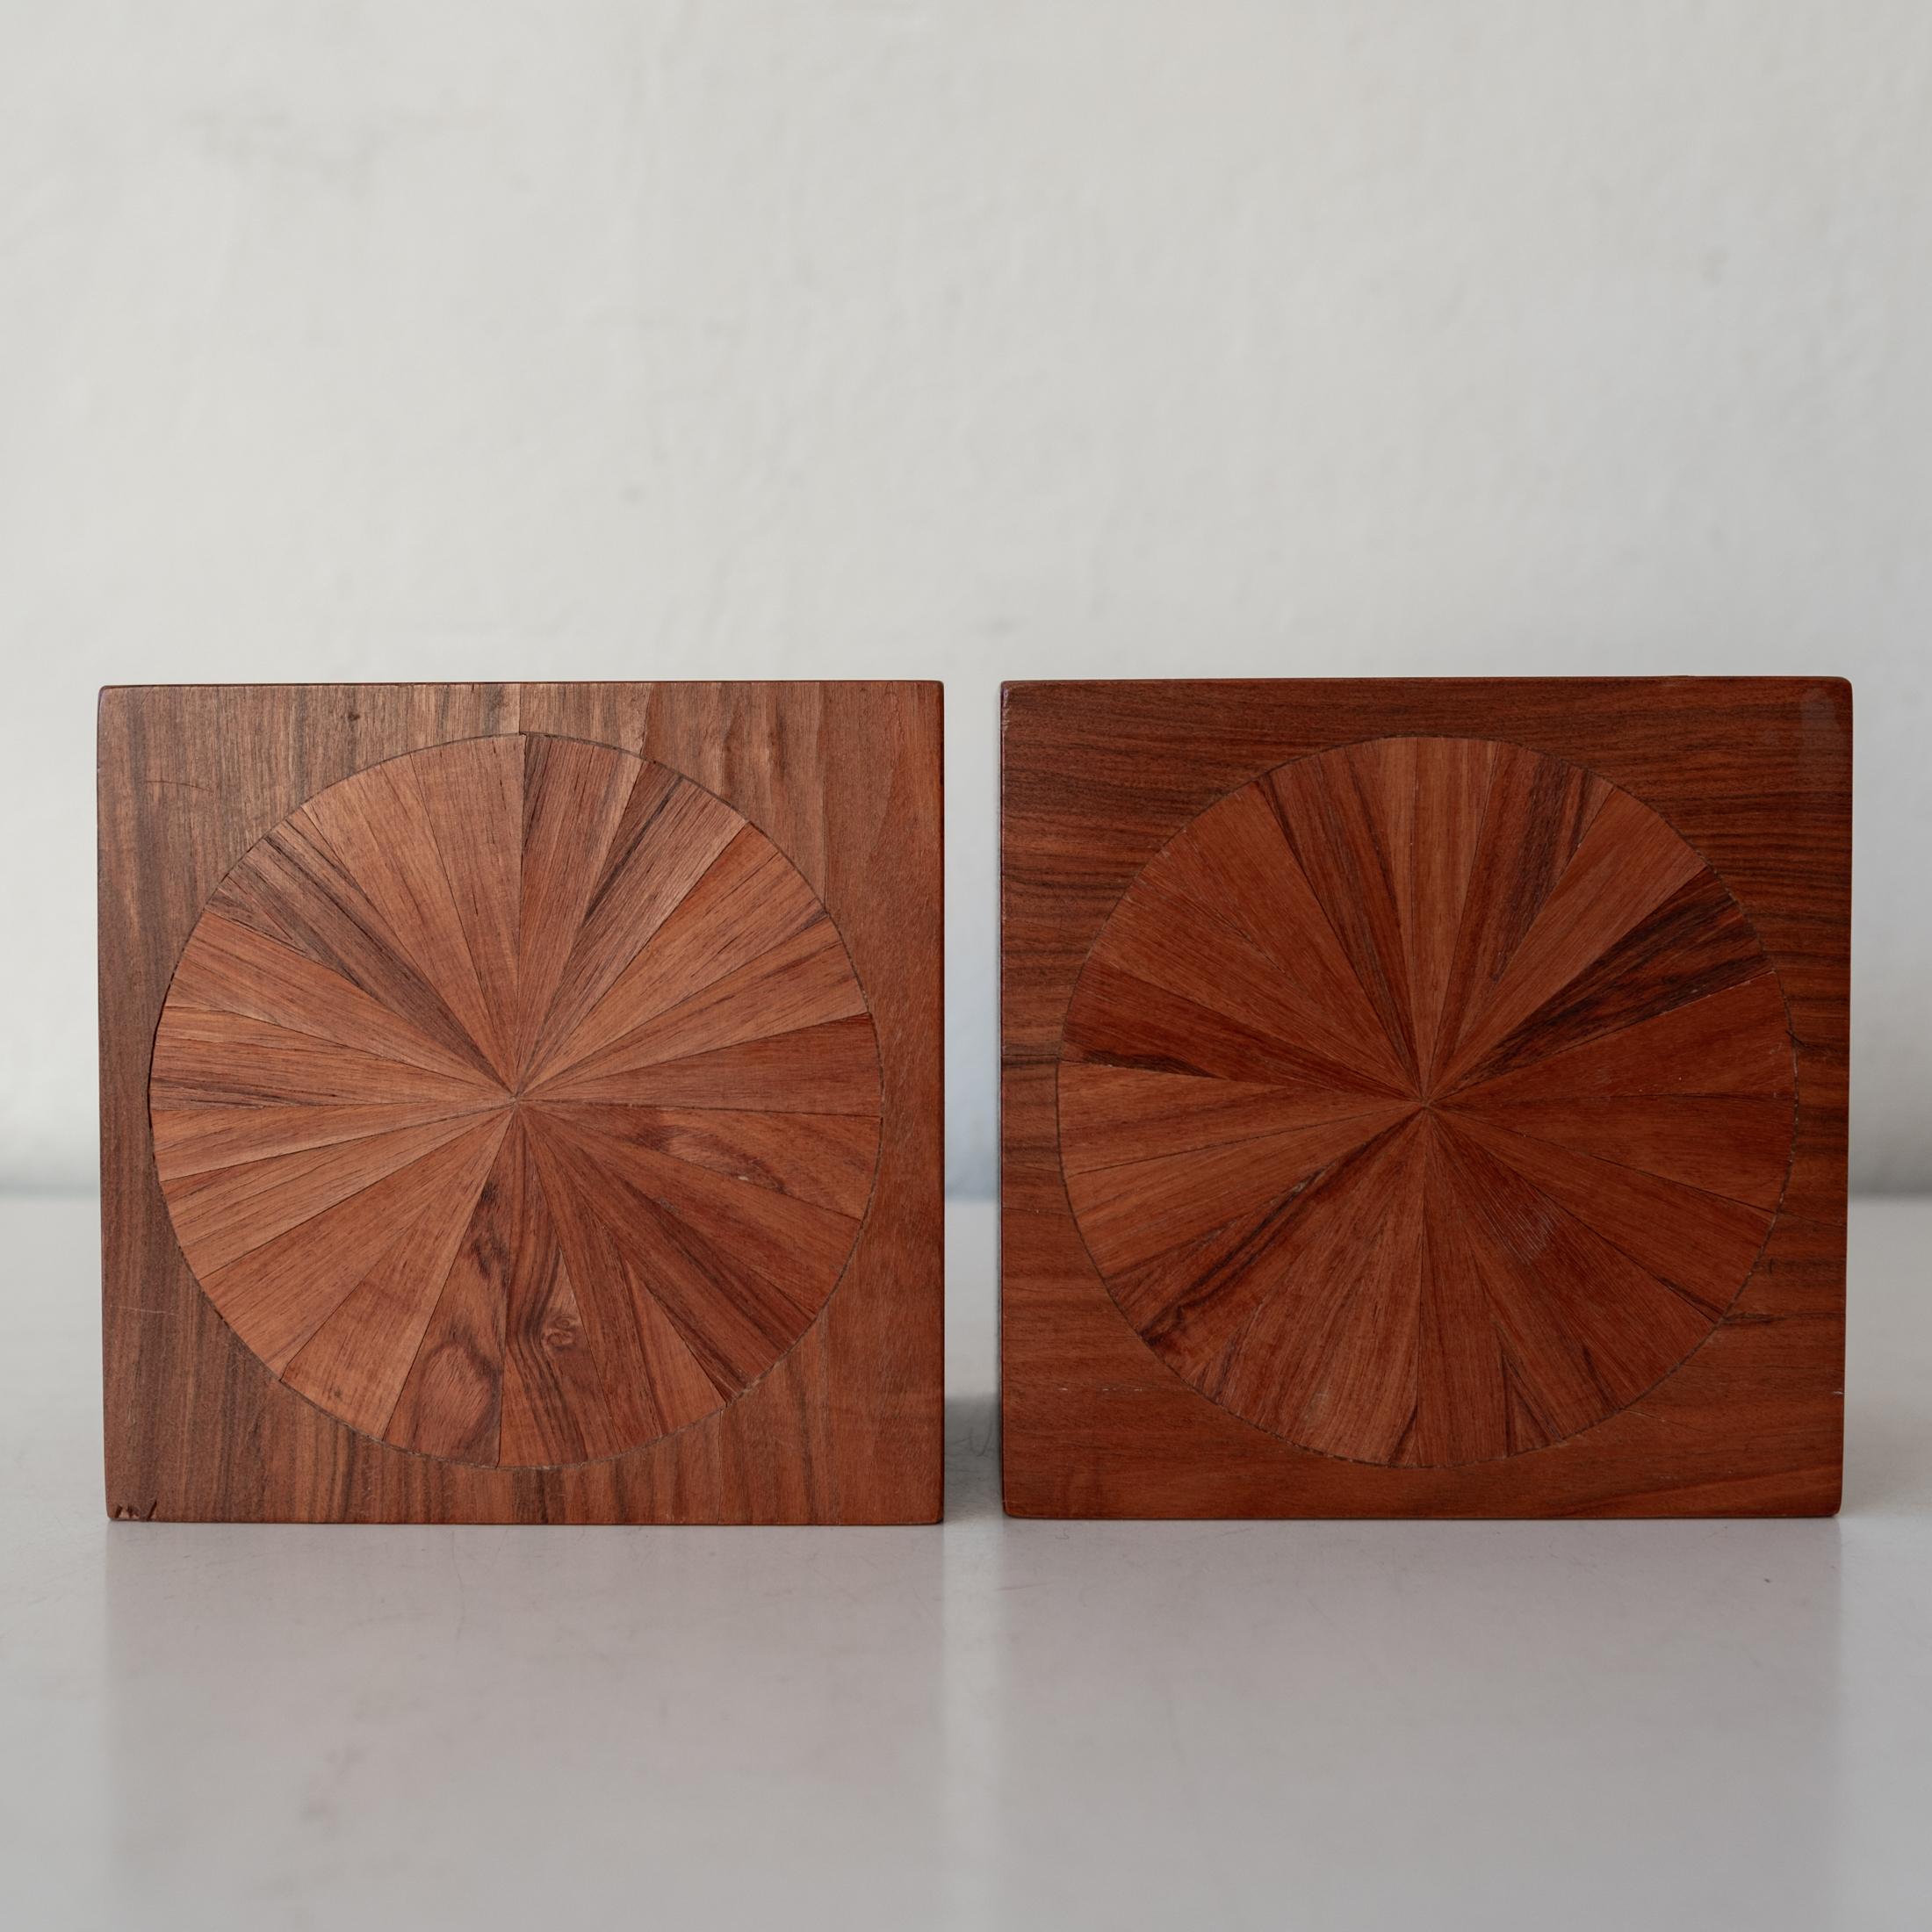 American Studio Crafted Wood Marquetry Bookends by Jere Osgood For Sale